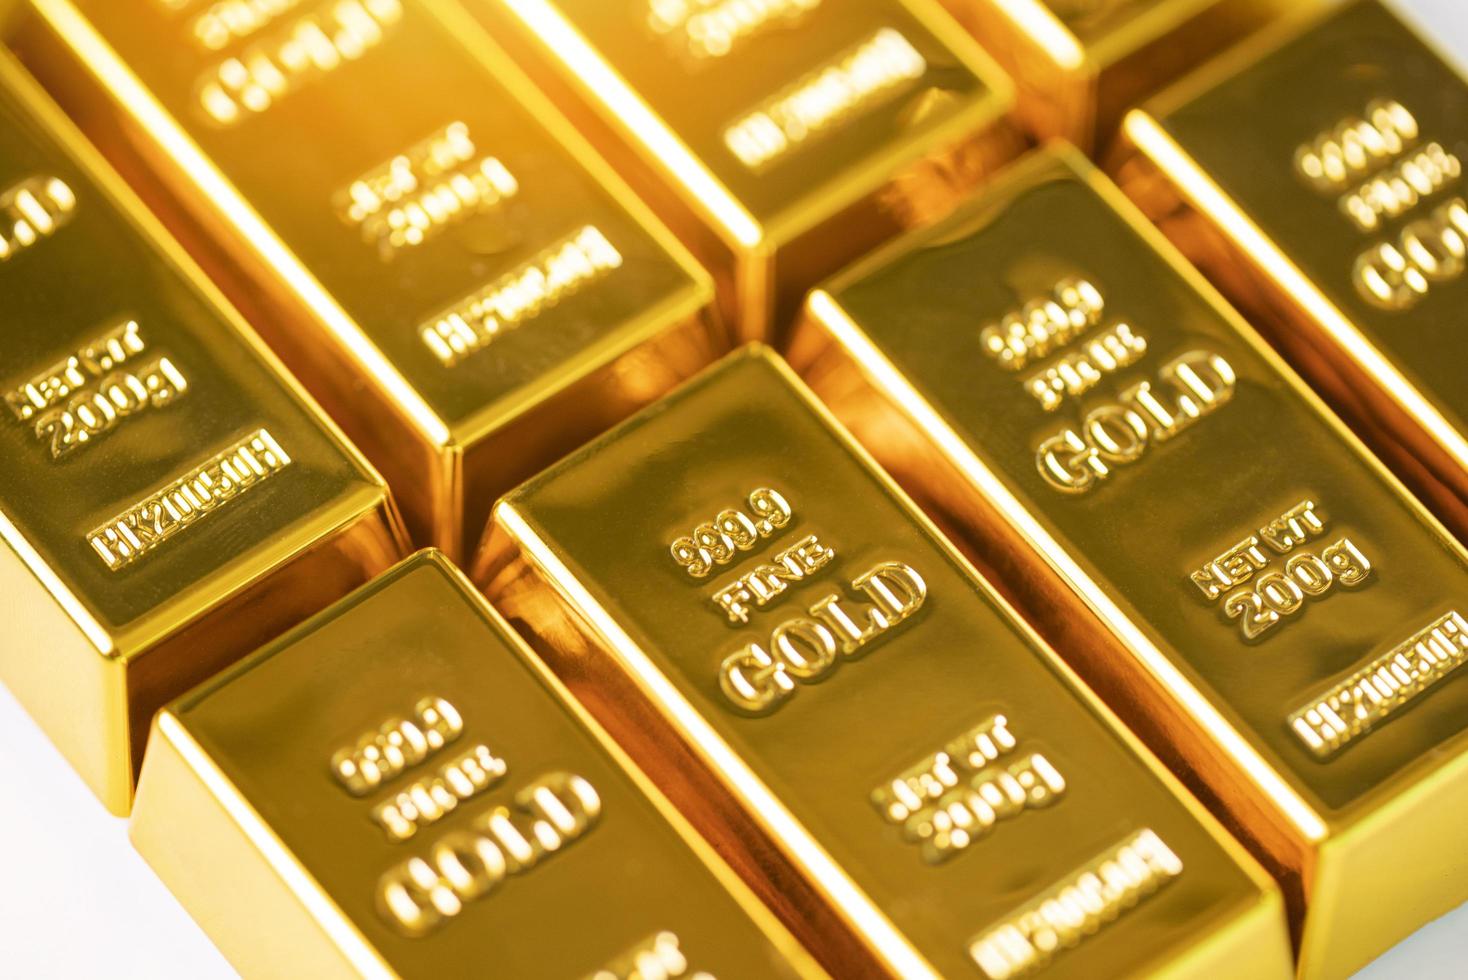 Gold bars on white background, row of gold bars financial business economy concepts, wealth and reserve success in business and finance photo